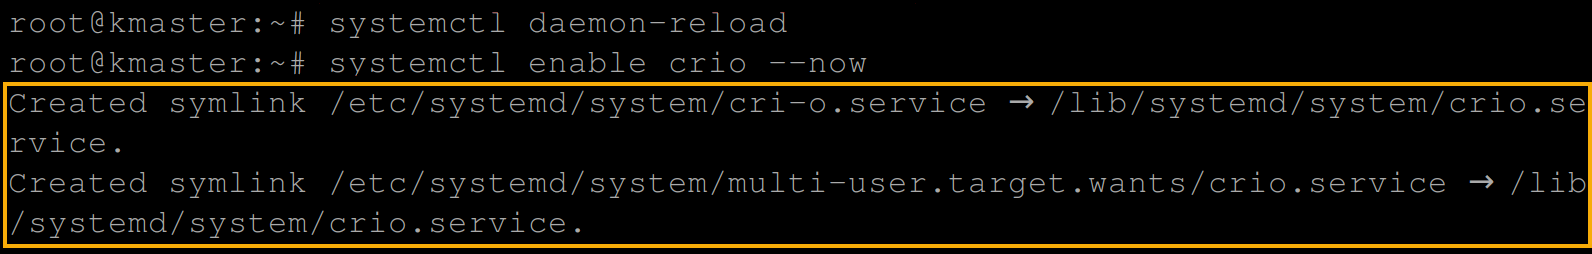 Reloading systemd confirmations and enabling CRI-O